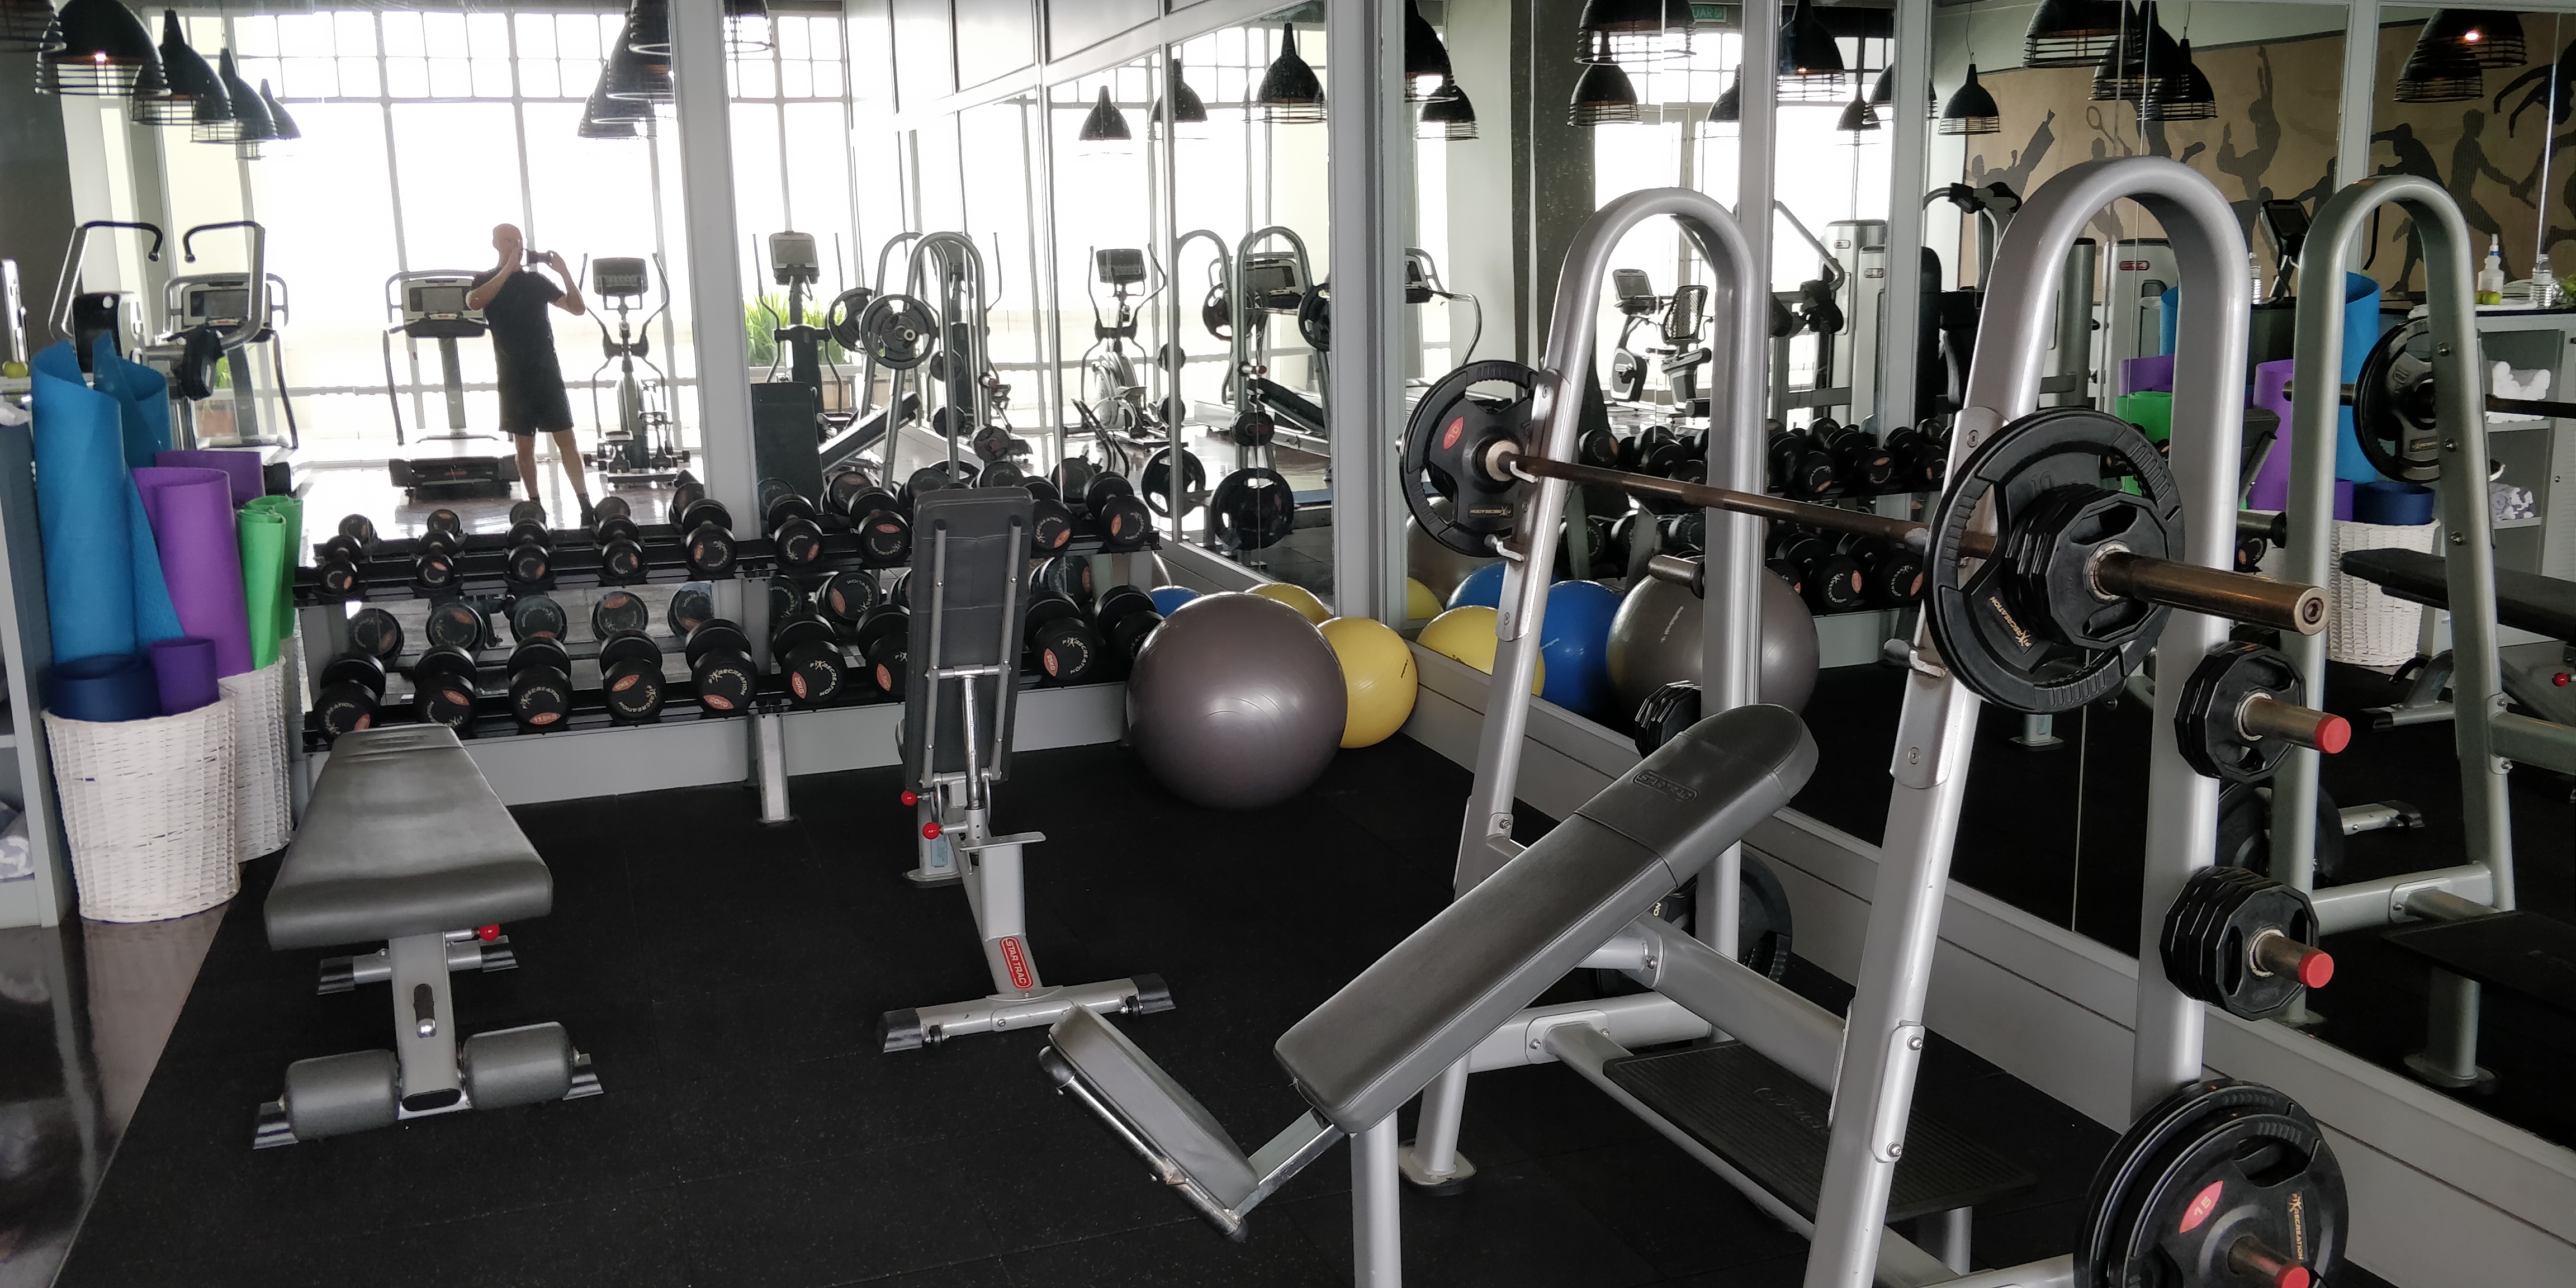 A PICTURE OF THE WEIGHT SECTION OF THE GYM